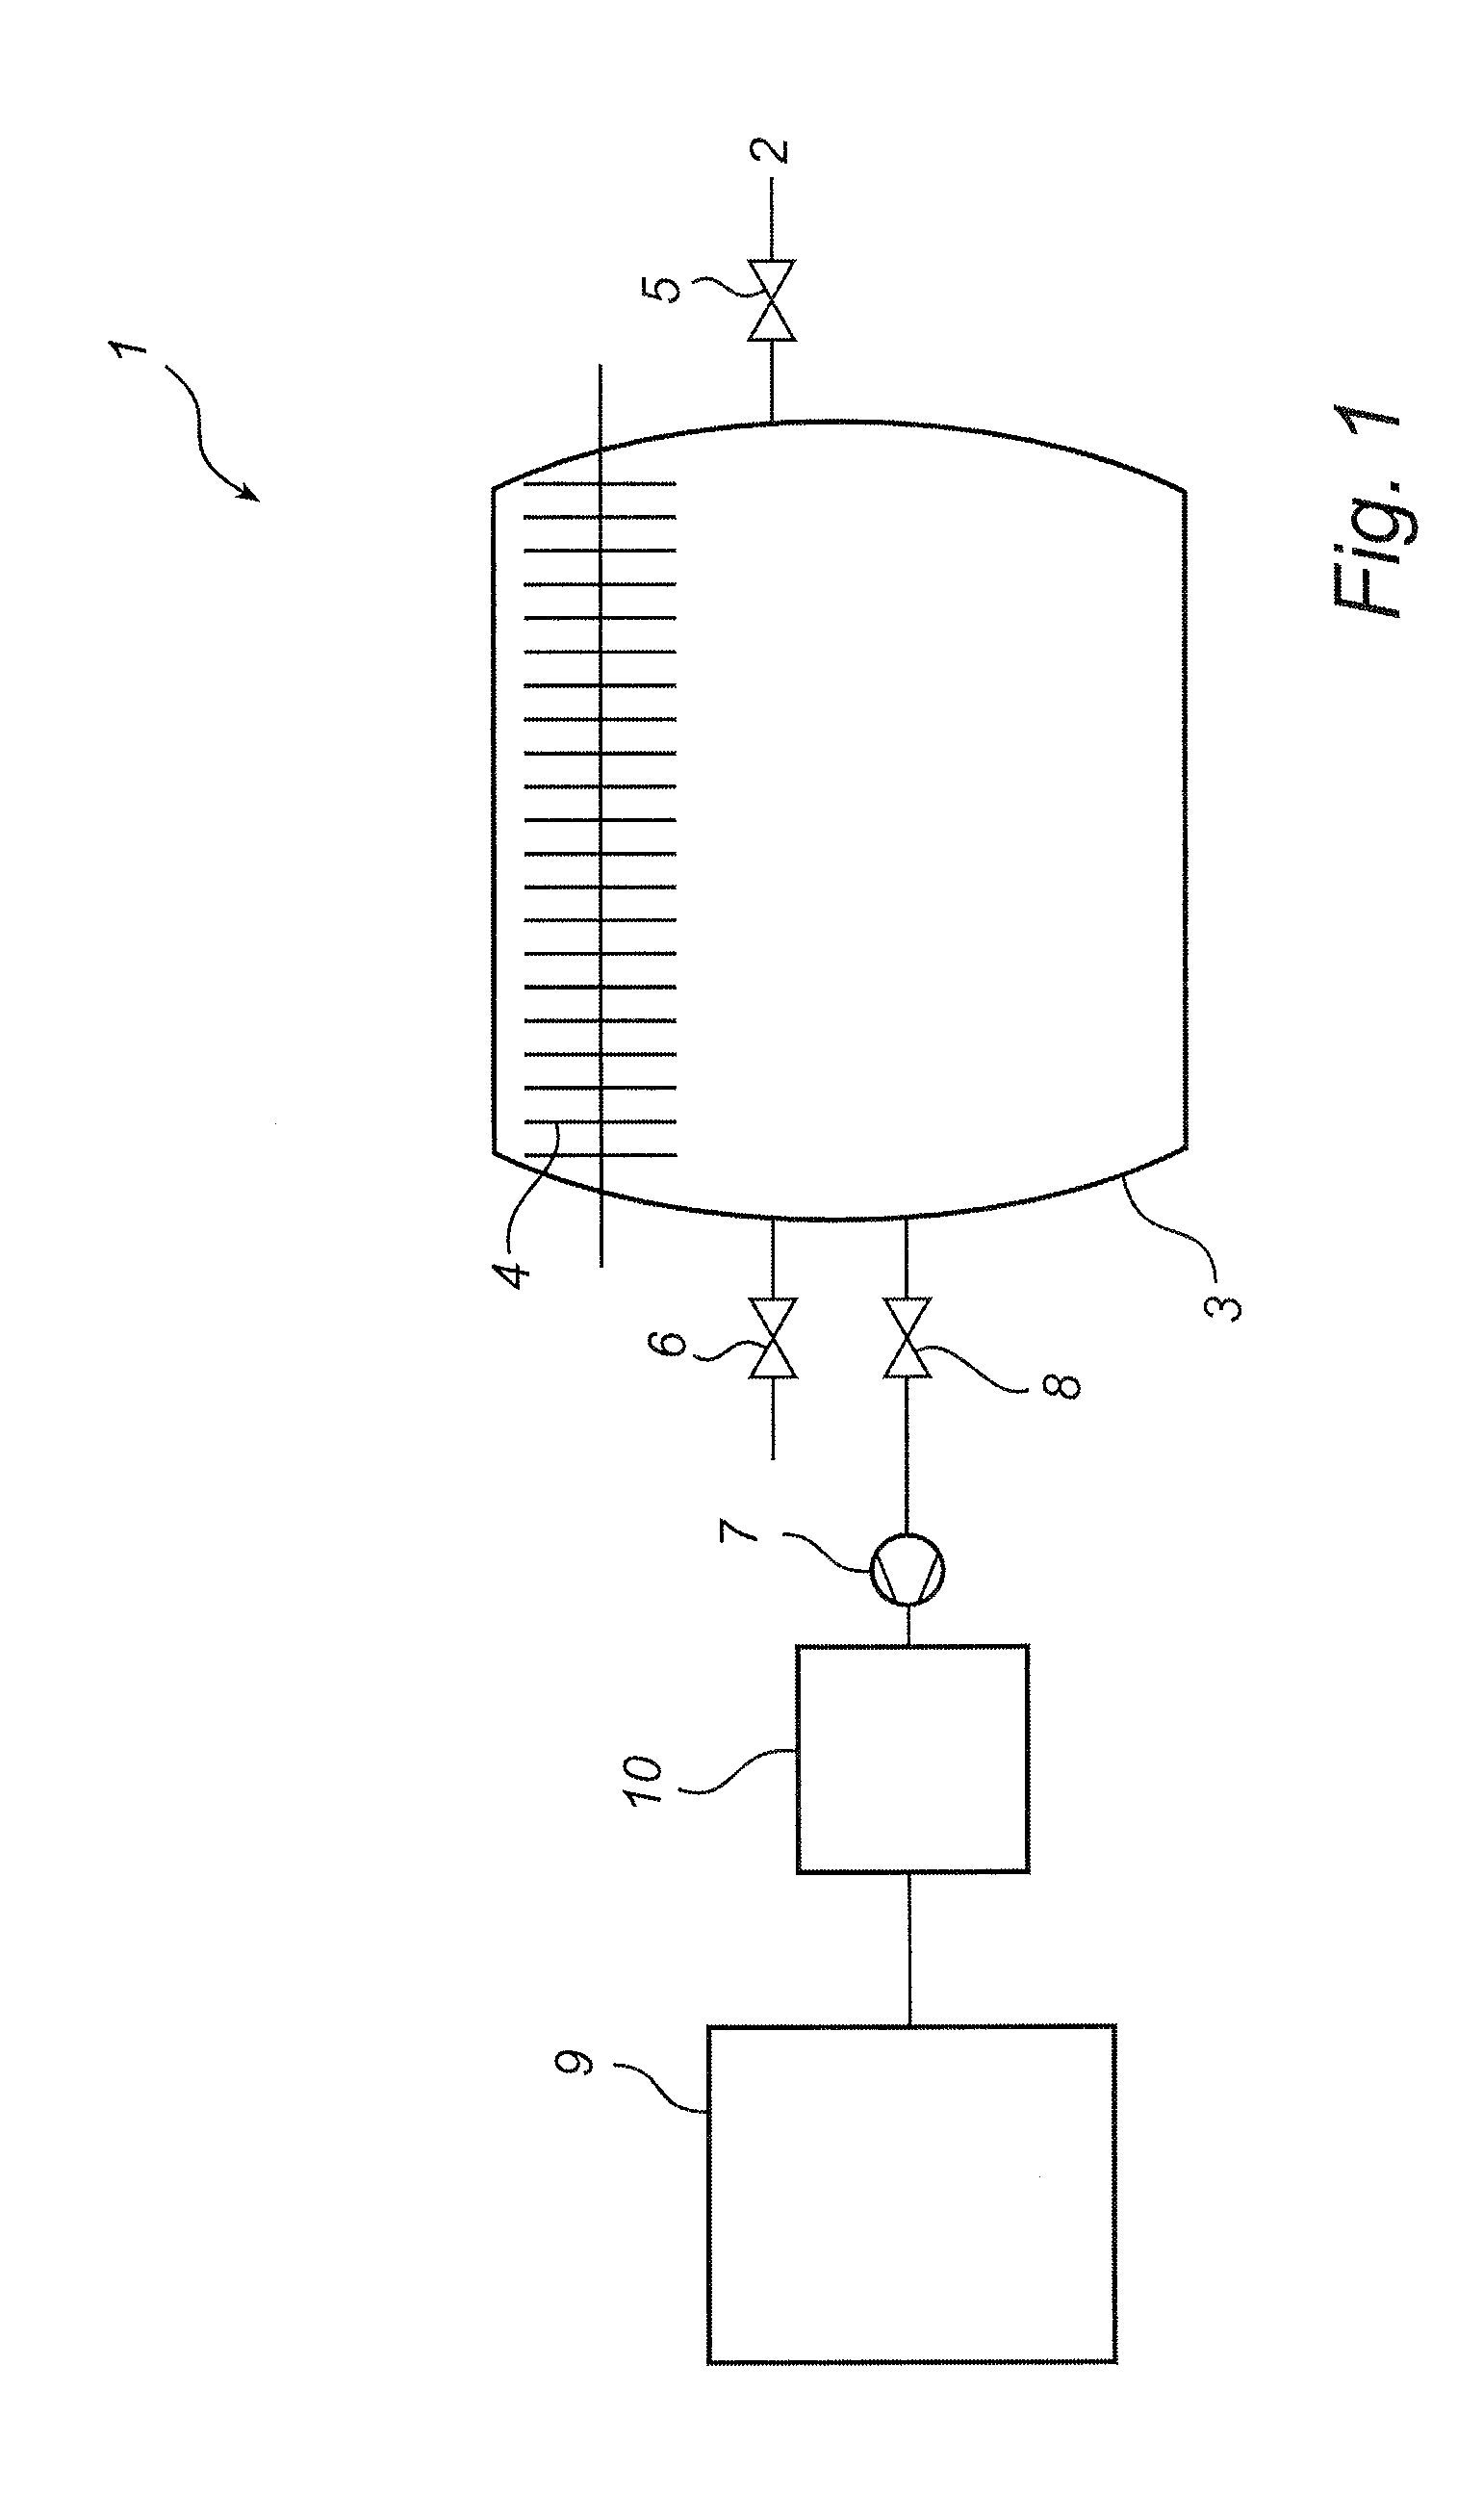 Operation of a frosting vessel of an Anti-sublimation system